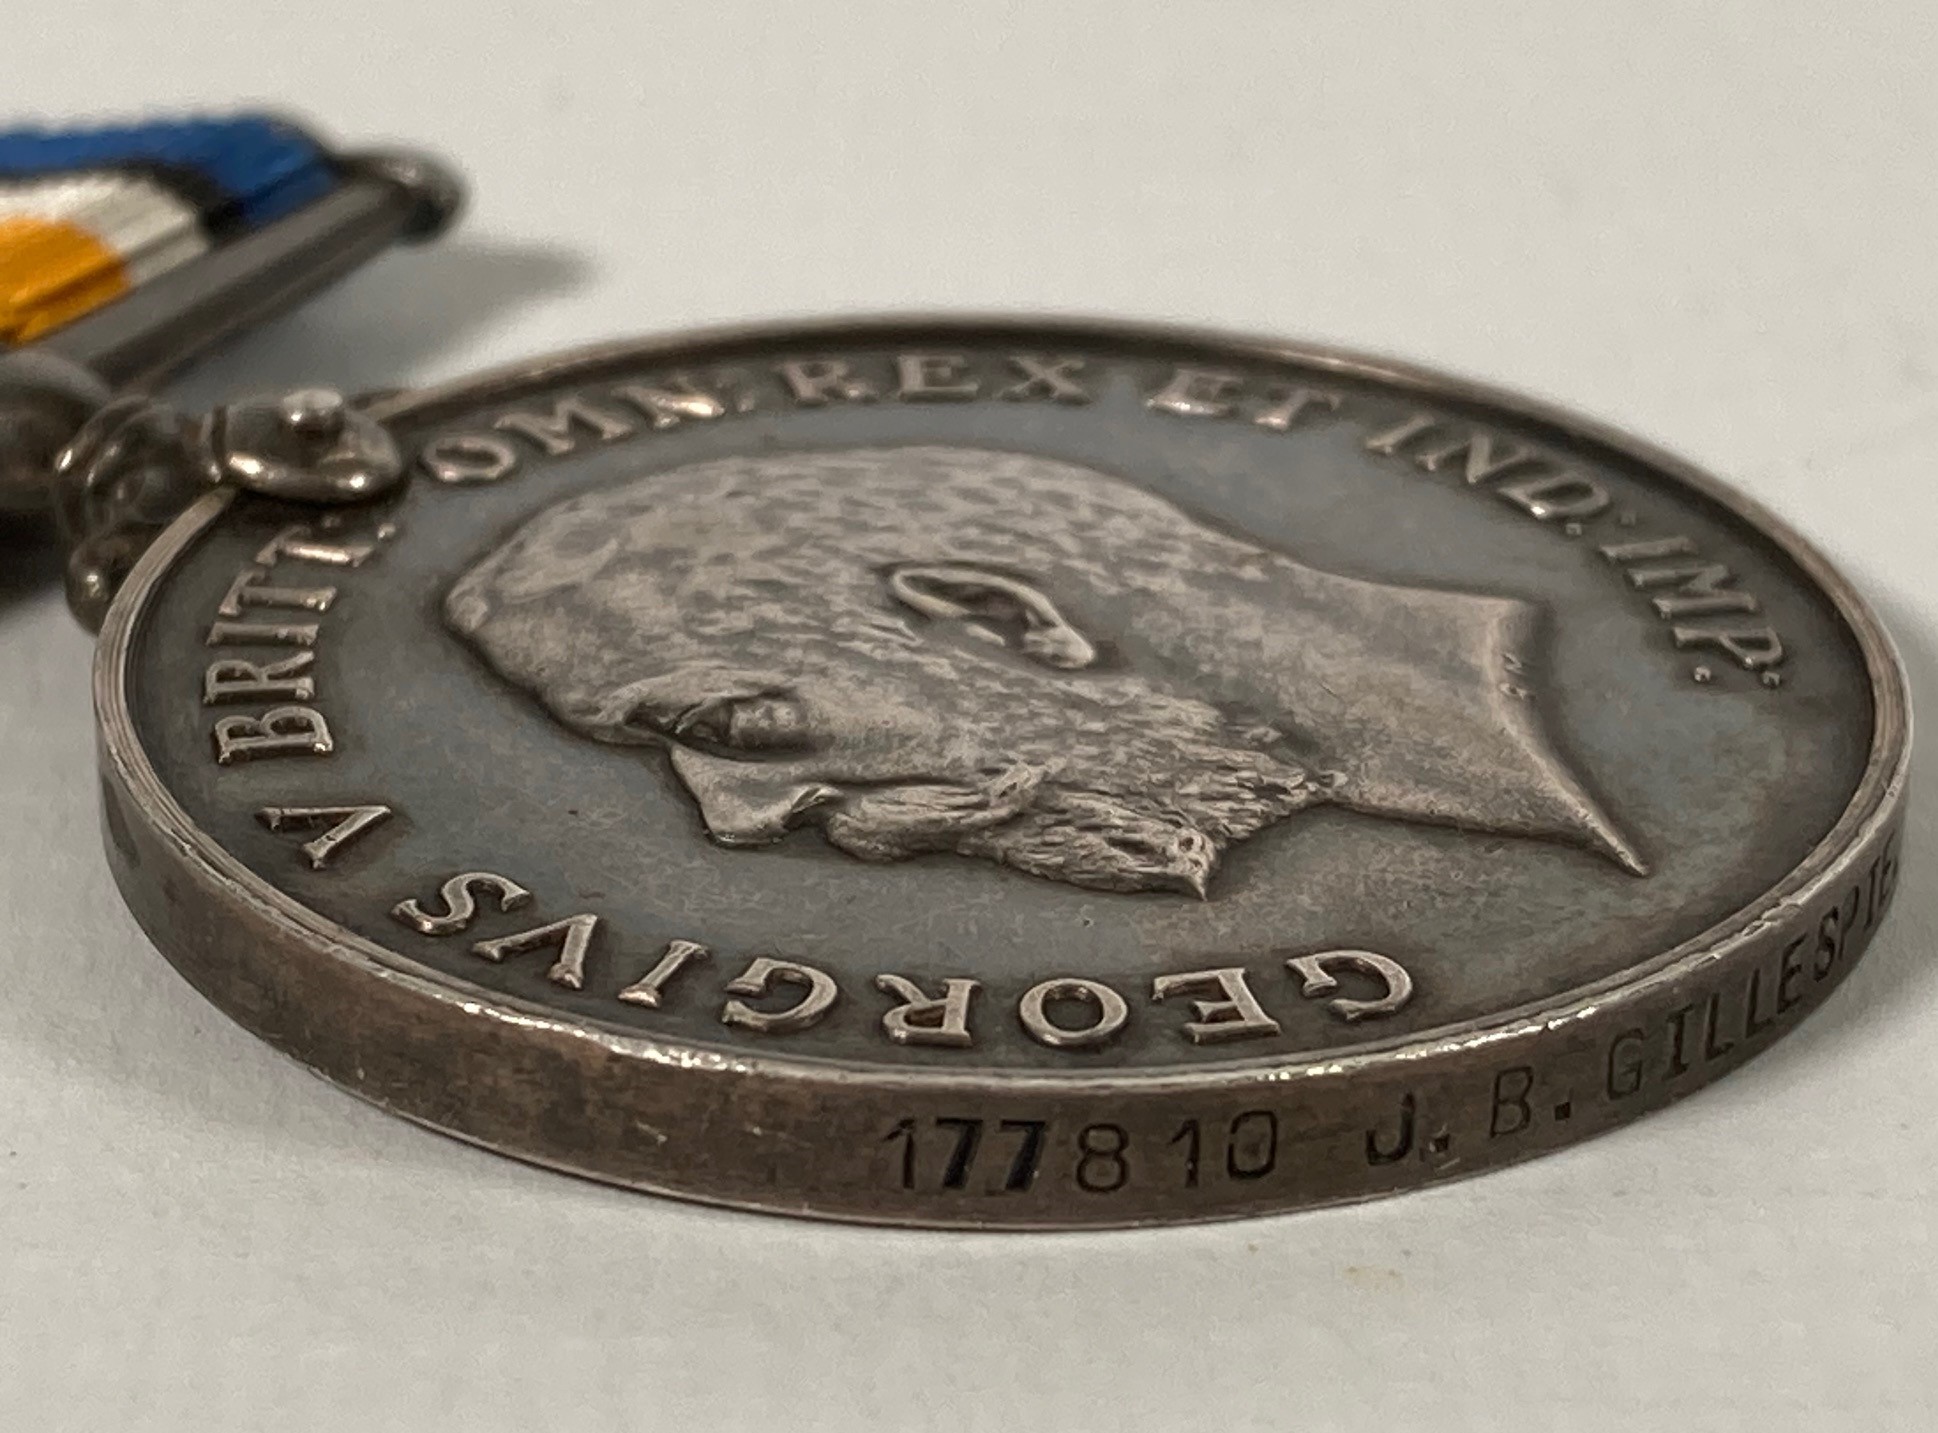 A pair of WW1 medals: War medal 1777810 J. B. Gillespie C.Y.S. RN & For Meritorious Service 177810 J - Image 6 of 10